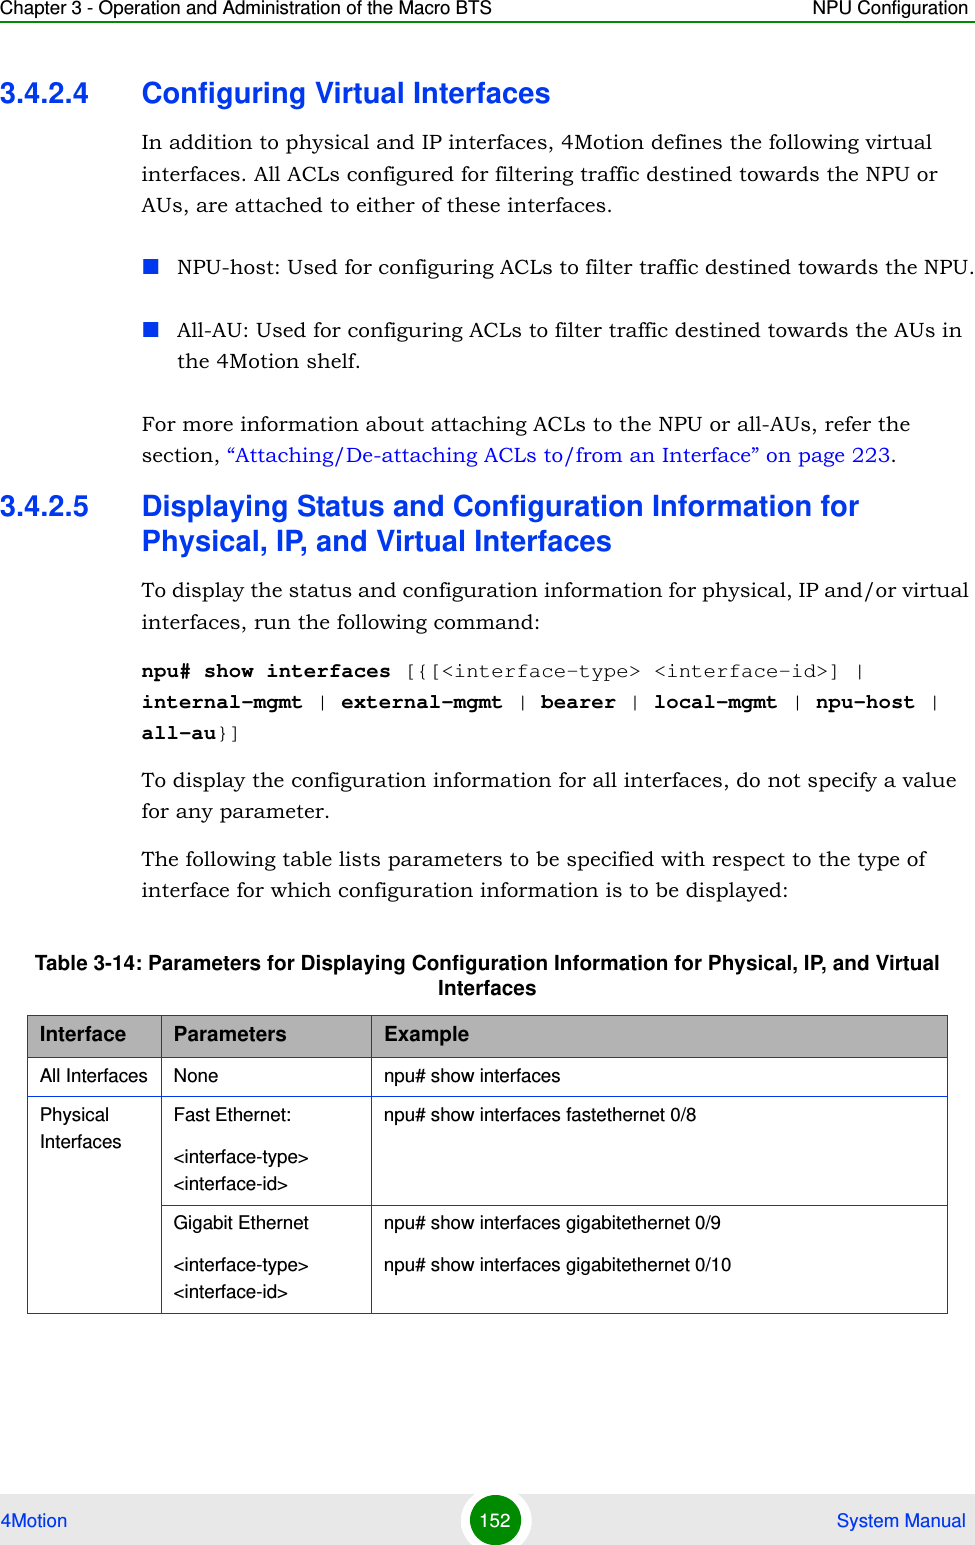 Chapter 3 - Operation and Administration of the Macro BTS NPU Configuration4Motion 152  System Manual3.4.2.4 Configuring Virtual InterfacesIn addition to physical and IP interfaces, 4Motion defines the following virtual interfaces. All ACLs configured for filtering traffic destined towards the NPU or AUs, are attached to either of these interfaces.NPU-host: Used for configuring ACLs to filter traffic destined towards the NPU.All-AU: Used for configuring ACLs to filter traffic destined towards the AUs in the 4Motion shelf. For more information about attaching ACLs to the NPU or all-AUs, refer the section, “Attaching/De-attaching ACLs to/from an Interface” on page 223.3.4.2.5 Displaying Status and Configuration Information for Physical, IP, and Virtual InterfacesTo display the status and configuration information for physical, IP and/or virtual interfaces, run the following command:npu# show interfaces [{[&lt;interface-type&gt; &lt;interface-id&gt;] | internal-mgmt | external-mgmt | bearer | local-mgmt | npu-host | all-au}]To display the configuration information for all interfaces, do not specify a value for any parameter.The following table lists parameters to be specified with respect to the type of interface for which configuration information is to be displayed:Table 3-14: Parameters for Displaying Configuration Information for Physical, IP, and Virtual InterfacesInterface Parameters ExampleAll Interfaces None npu# show interfacesPhysical InterfacesFast Ethernet:&lt;interface-type&gt; &lt;interface-id&gt;npu# show interfaces fastethernet 0/8 Gigabit Ethernet&lt;interface-type&gt; &lt;interface-id&gt;npu# show interfaces gigabitethernet 0/9 npu# show interfaces gigabitethernet 0/10 